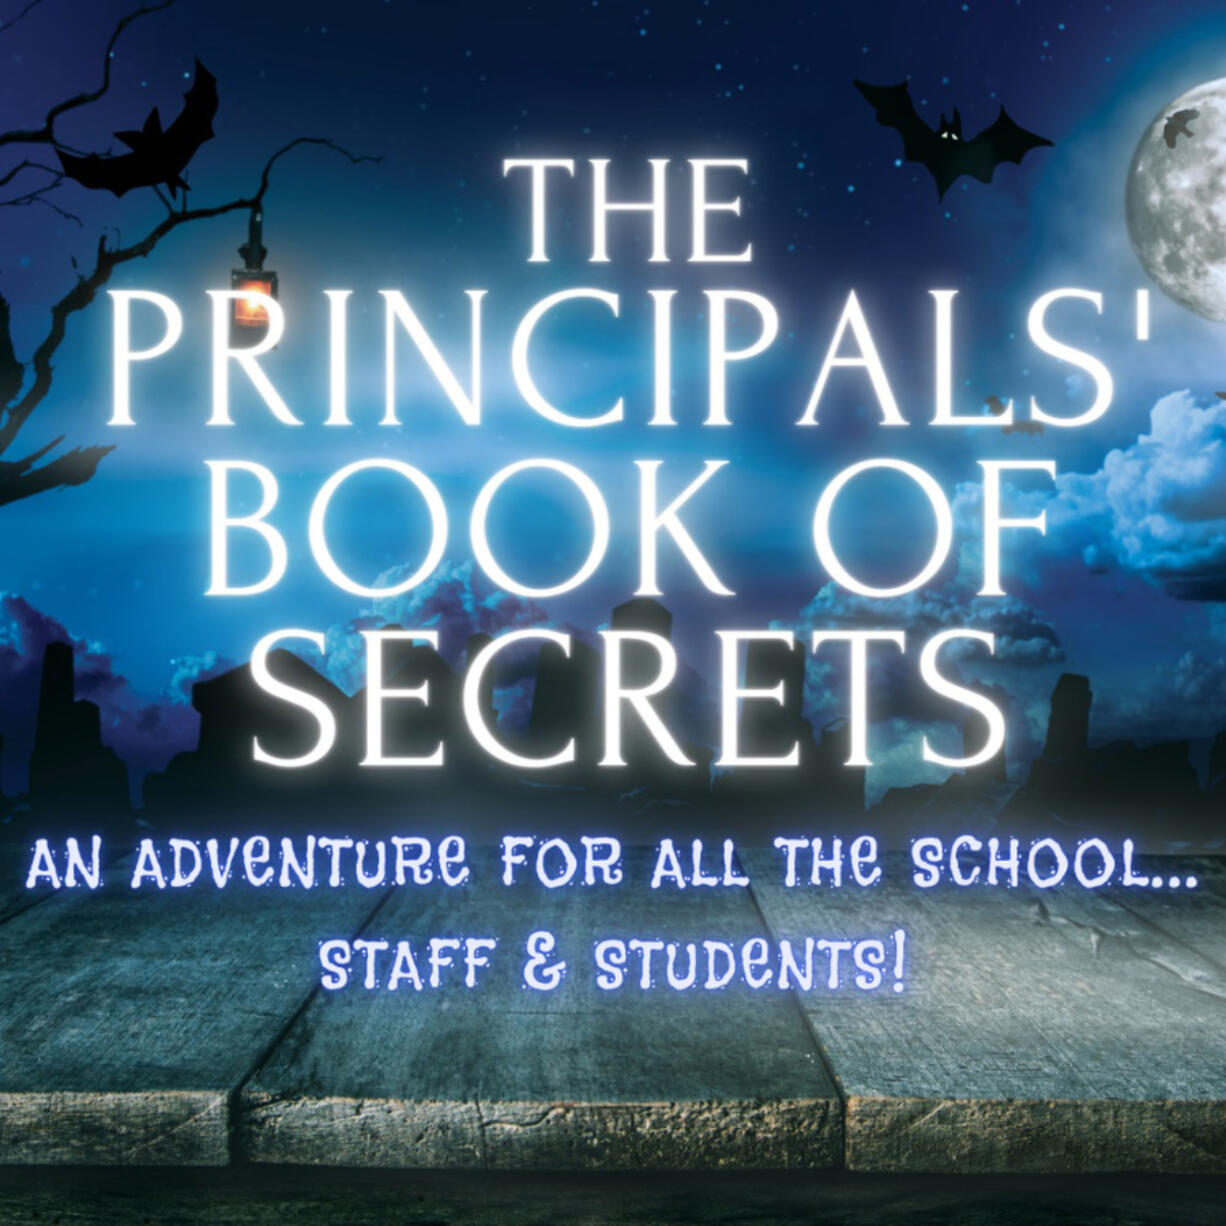 Students at Union Ridge Elementary recently helped solve the mystery of "The Principals' Book of Secrets."
(Photo contributed by Ridgefield School District)